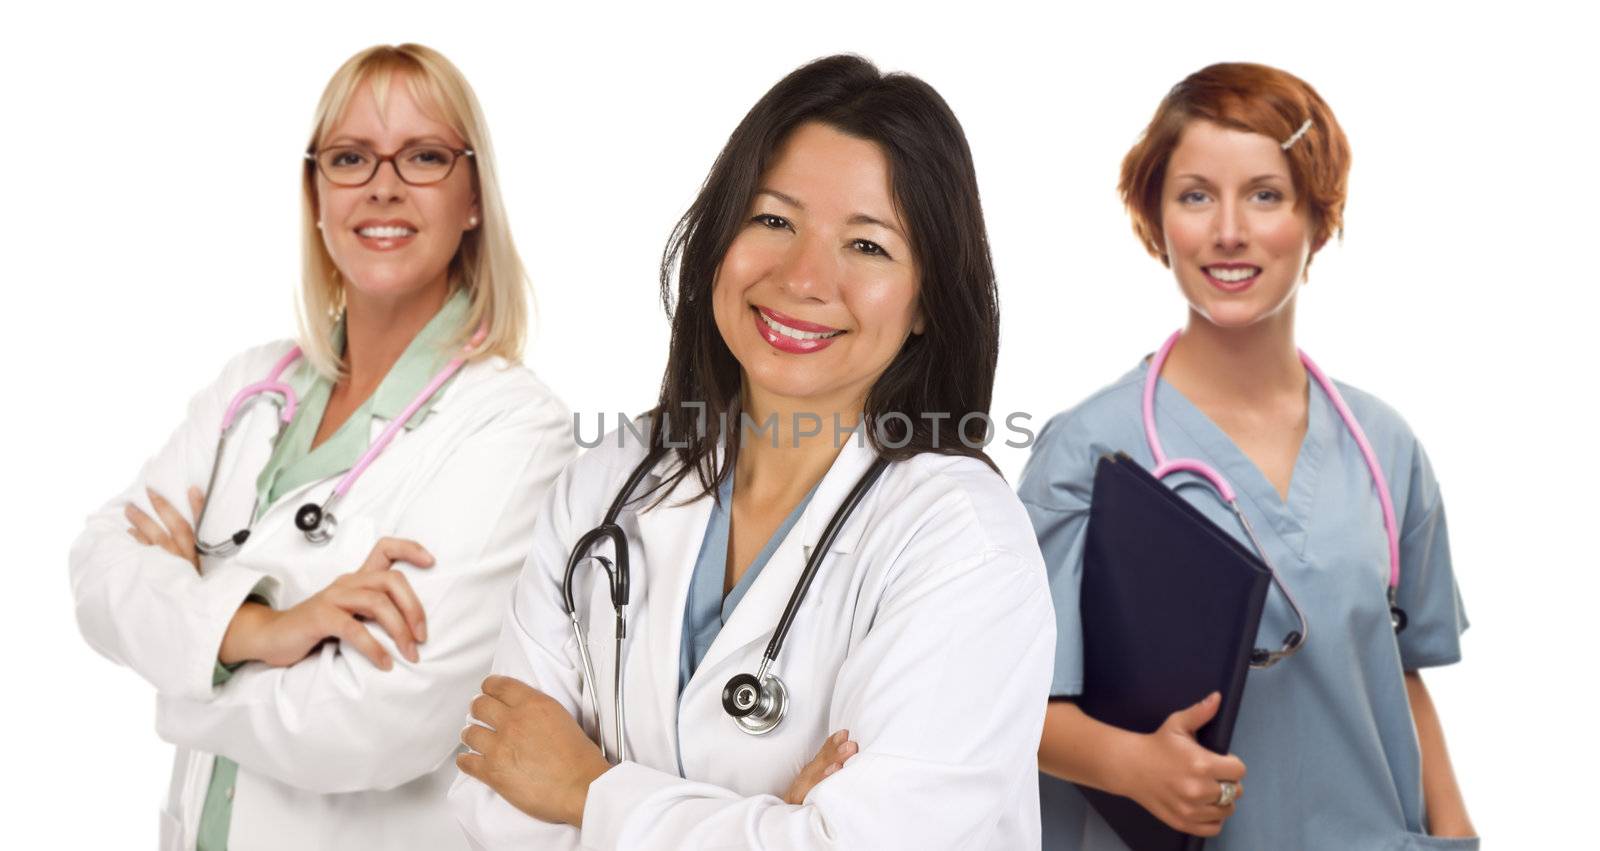 Three Female Doctors or Nurses Isolated on a White Background.